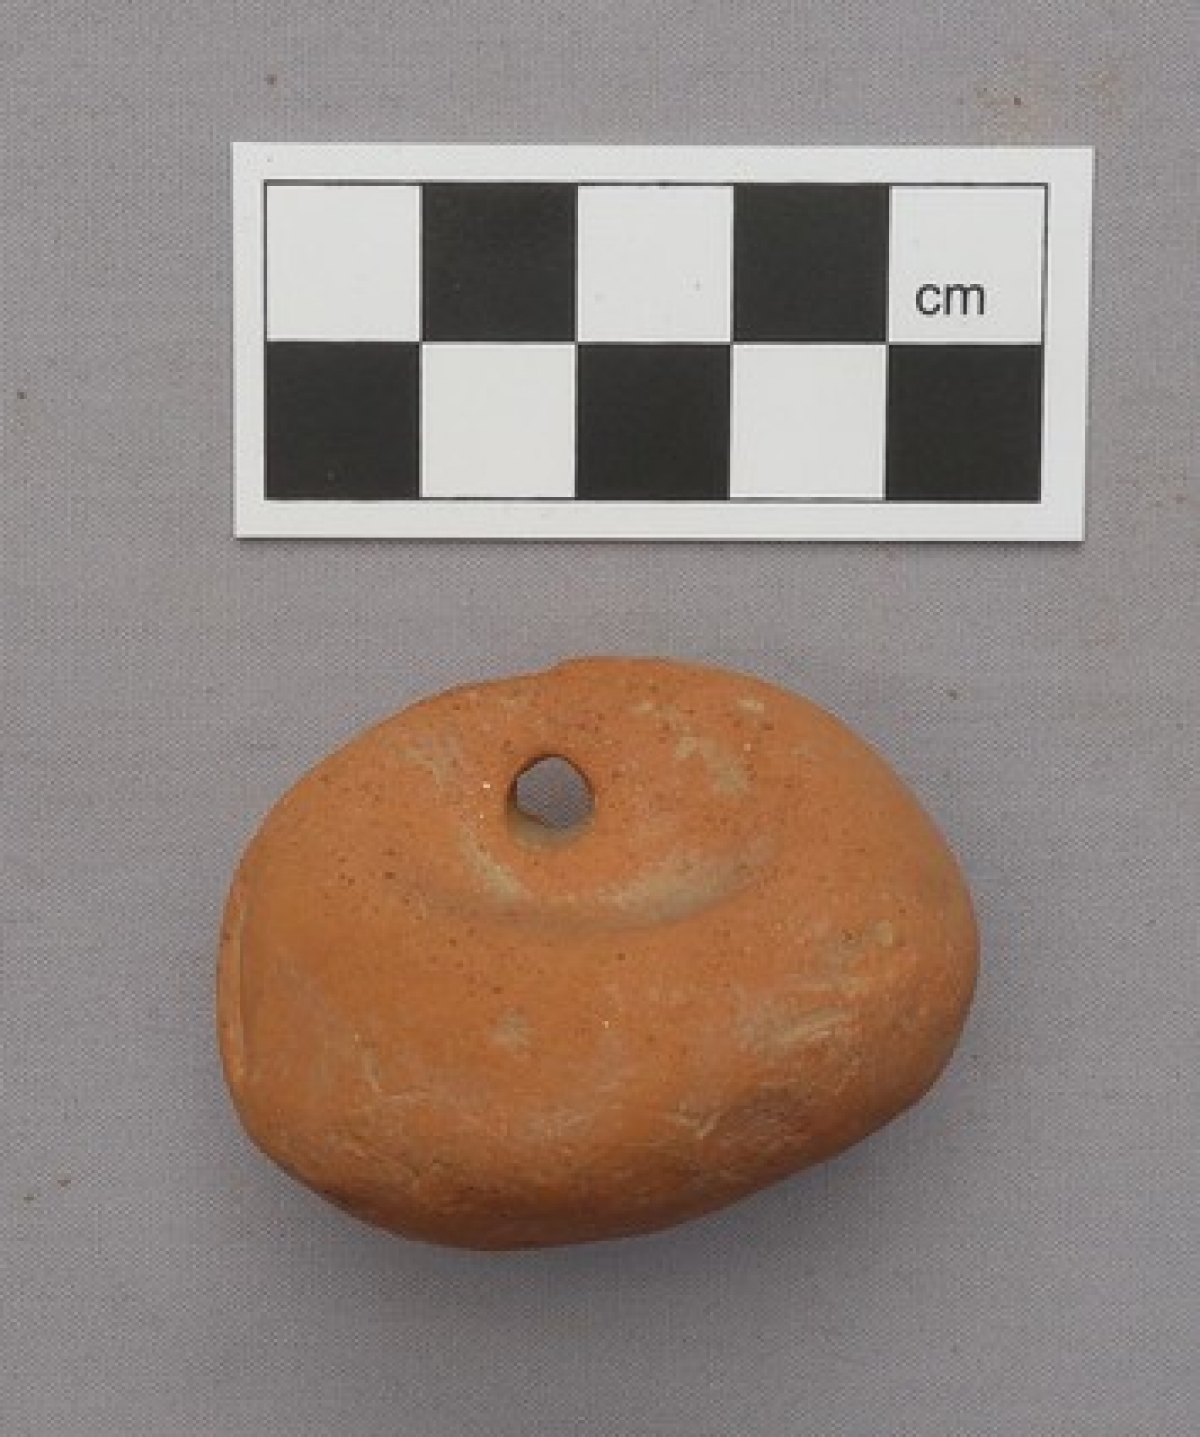 Ancient Greek loom weight, although the small size would suggest it to be something else.